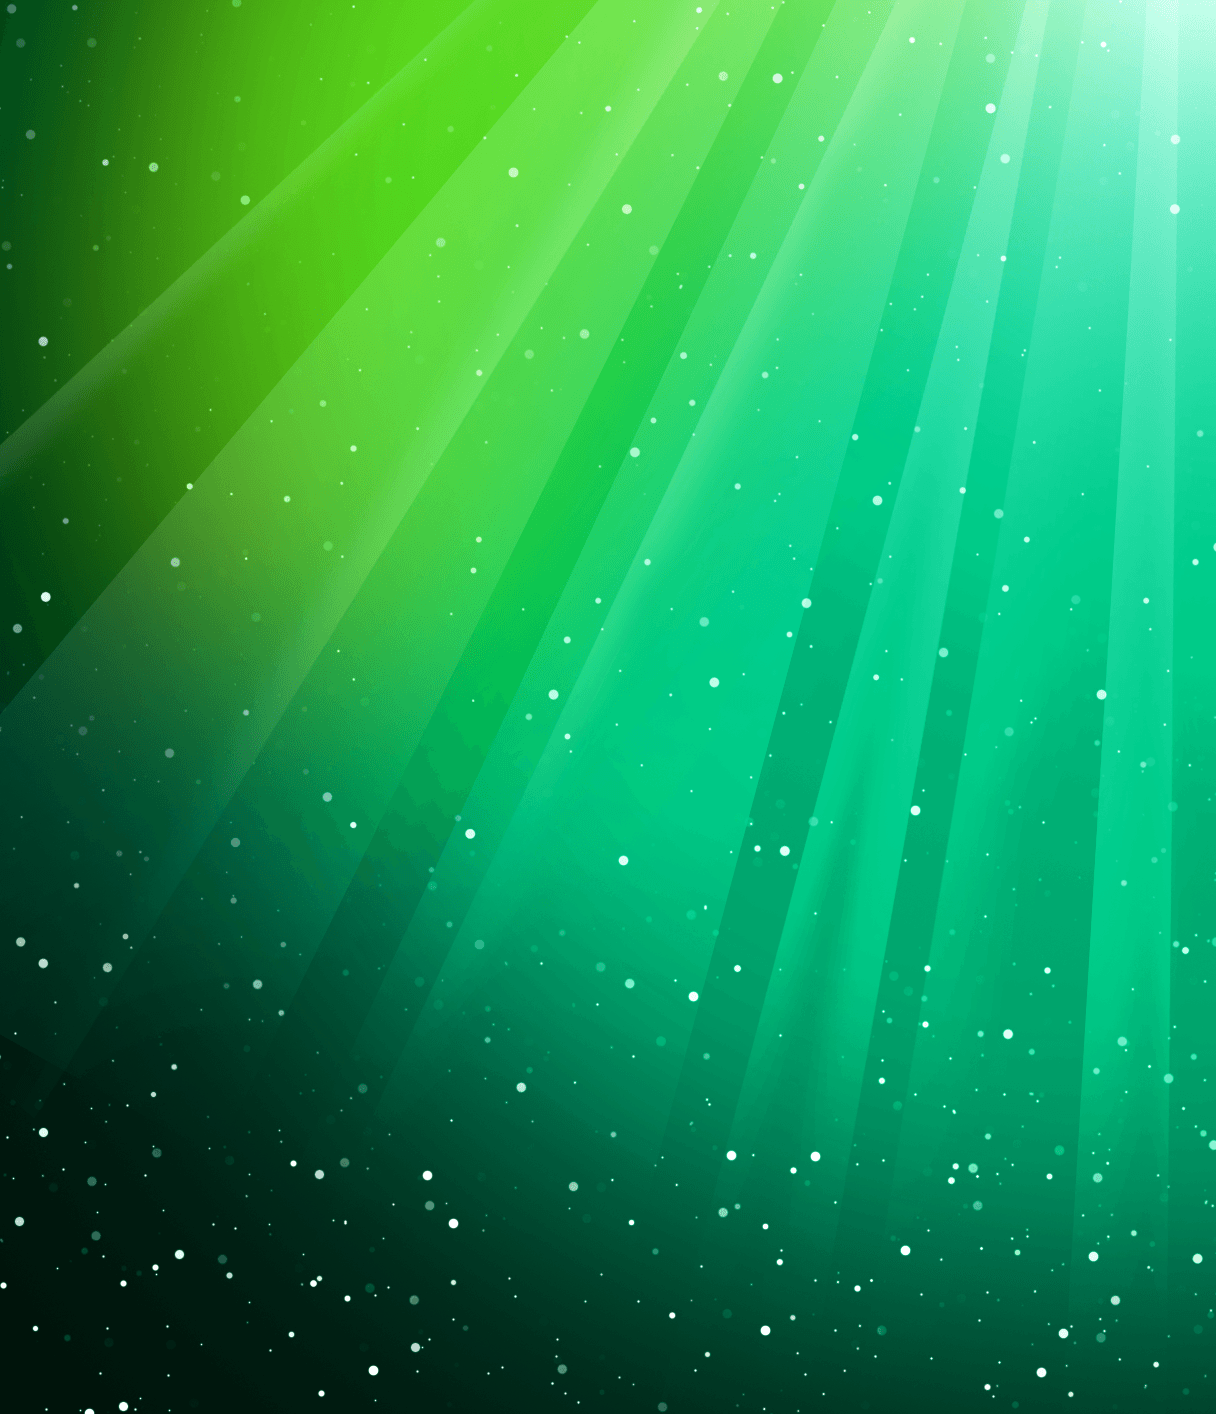 Green And Blue Abstract Wallpaper Image And Blue